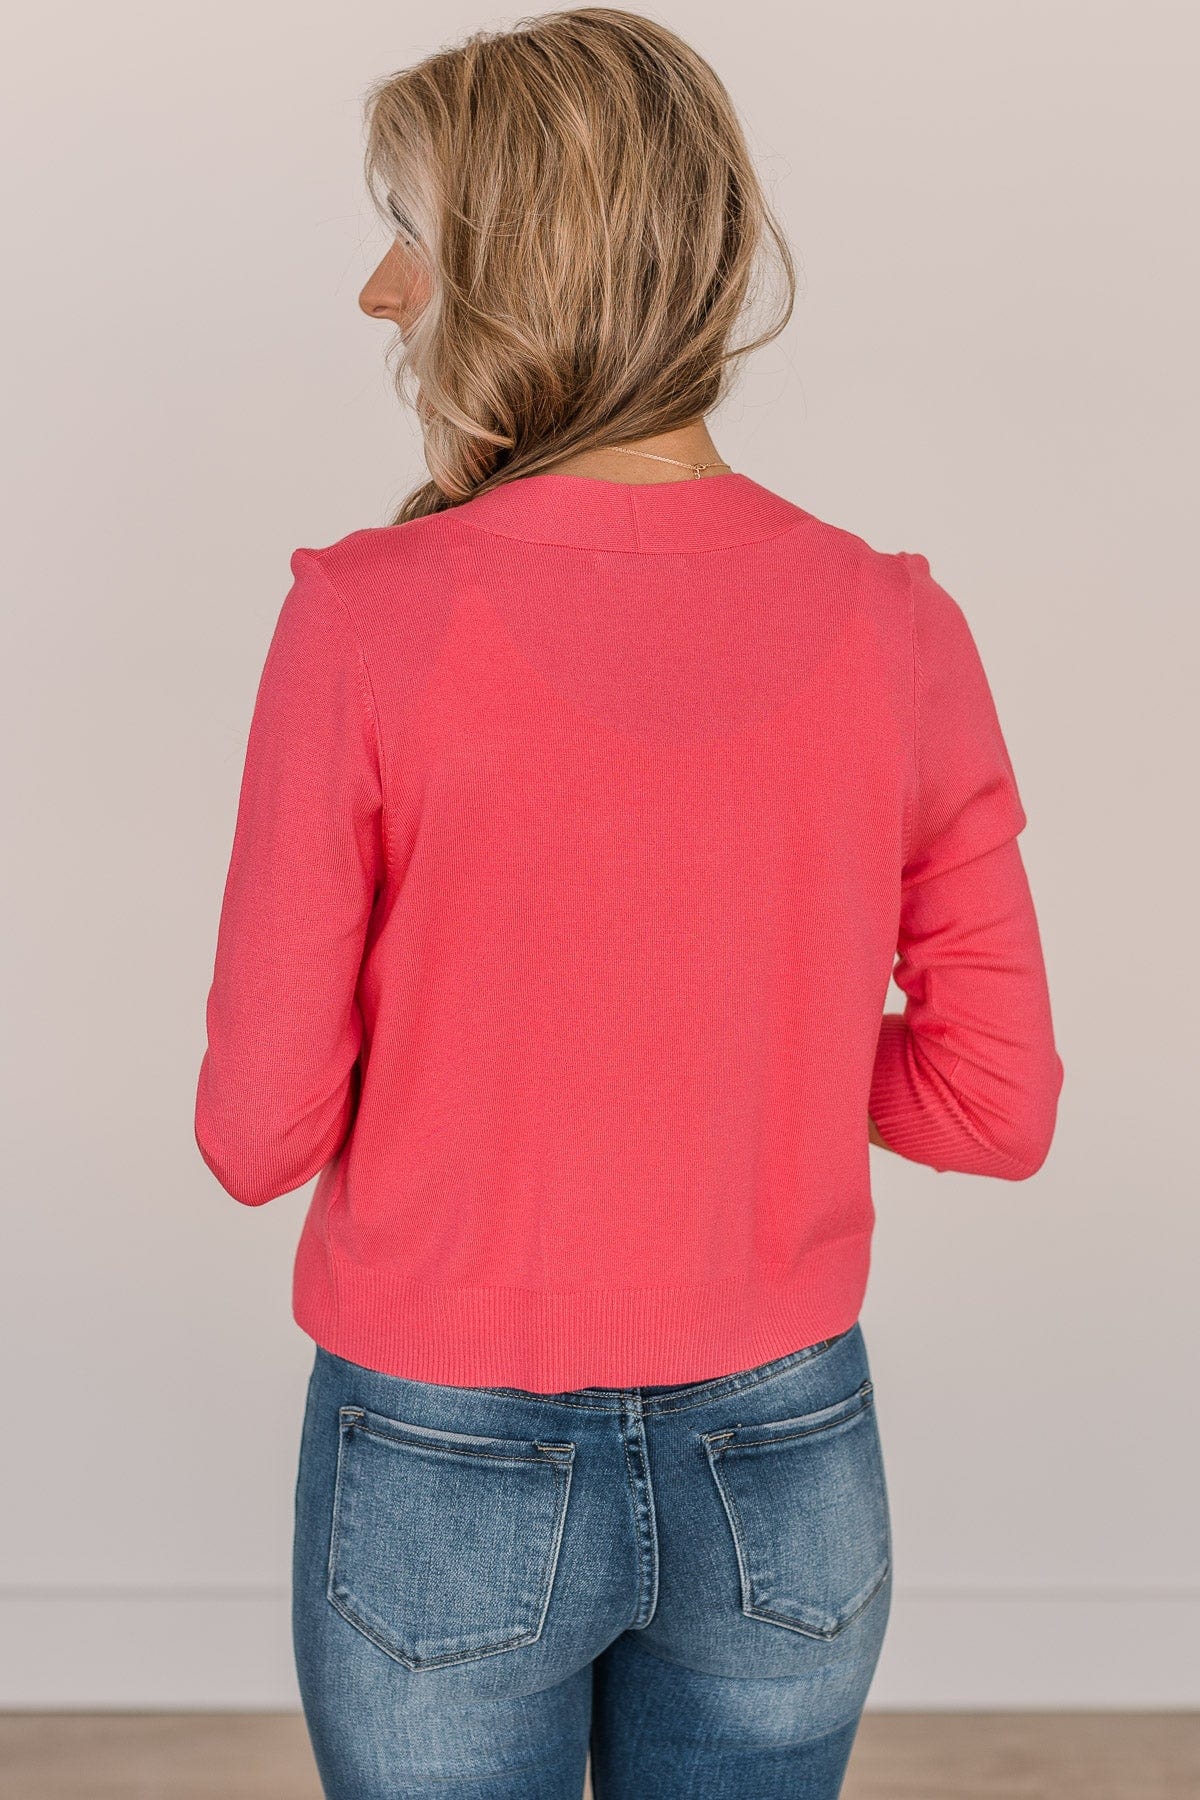 Never Miss A Beat Cropped Cardigan- Coral